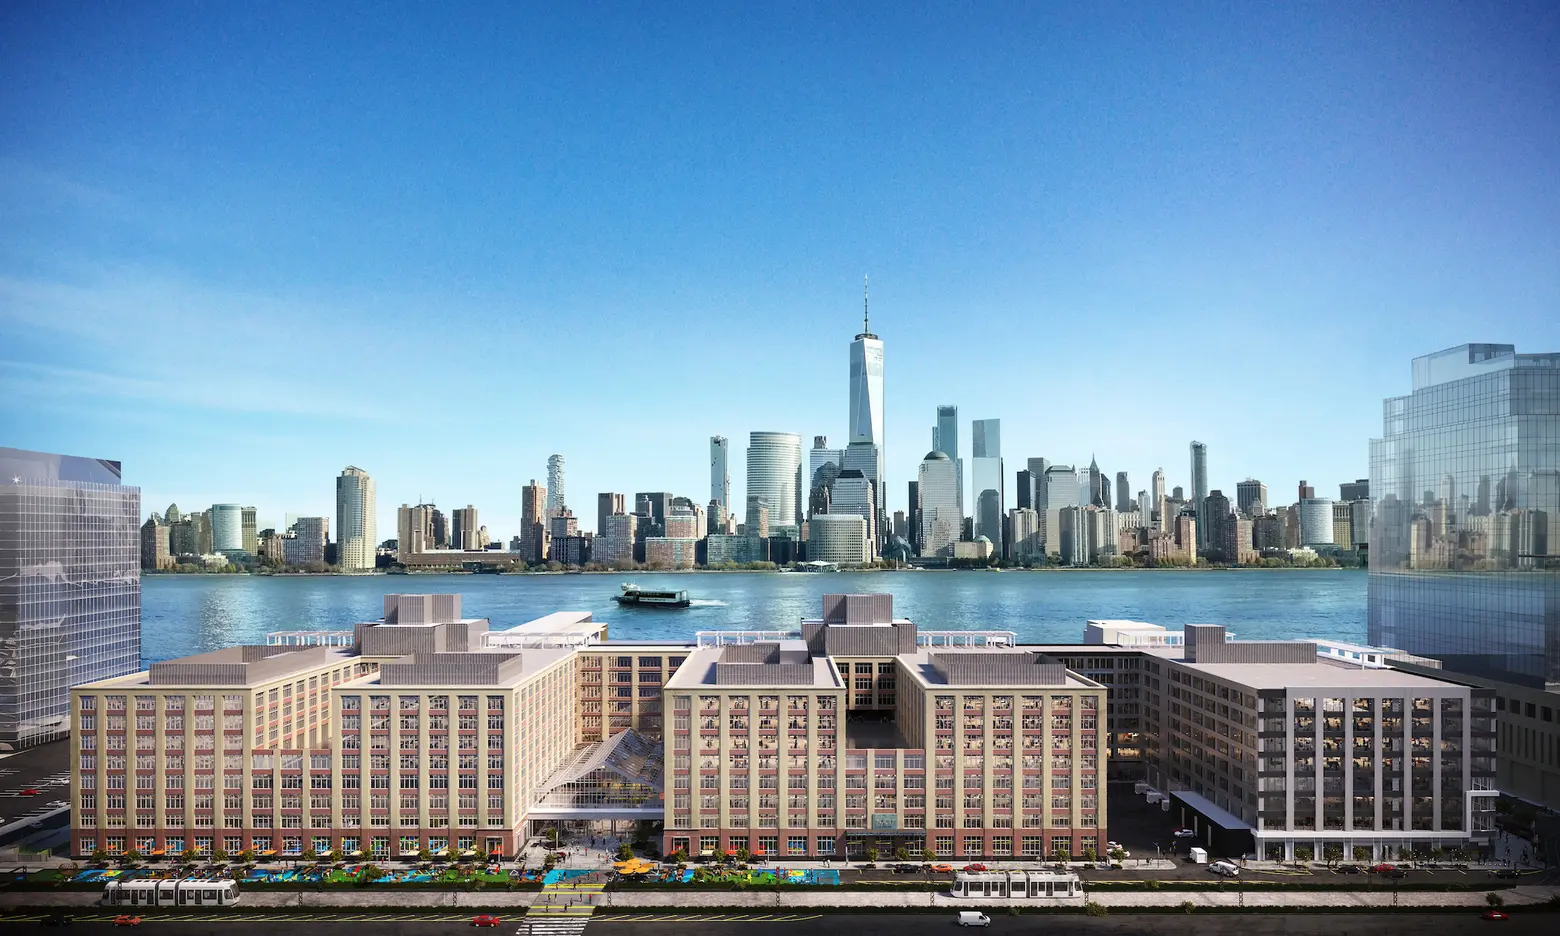 Work finally begins on Kushner's One Journal Square project in Jersey City